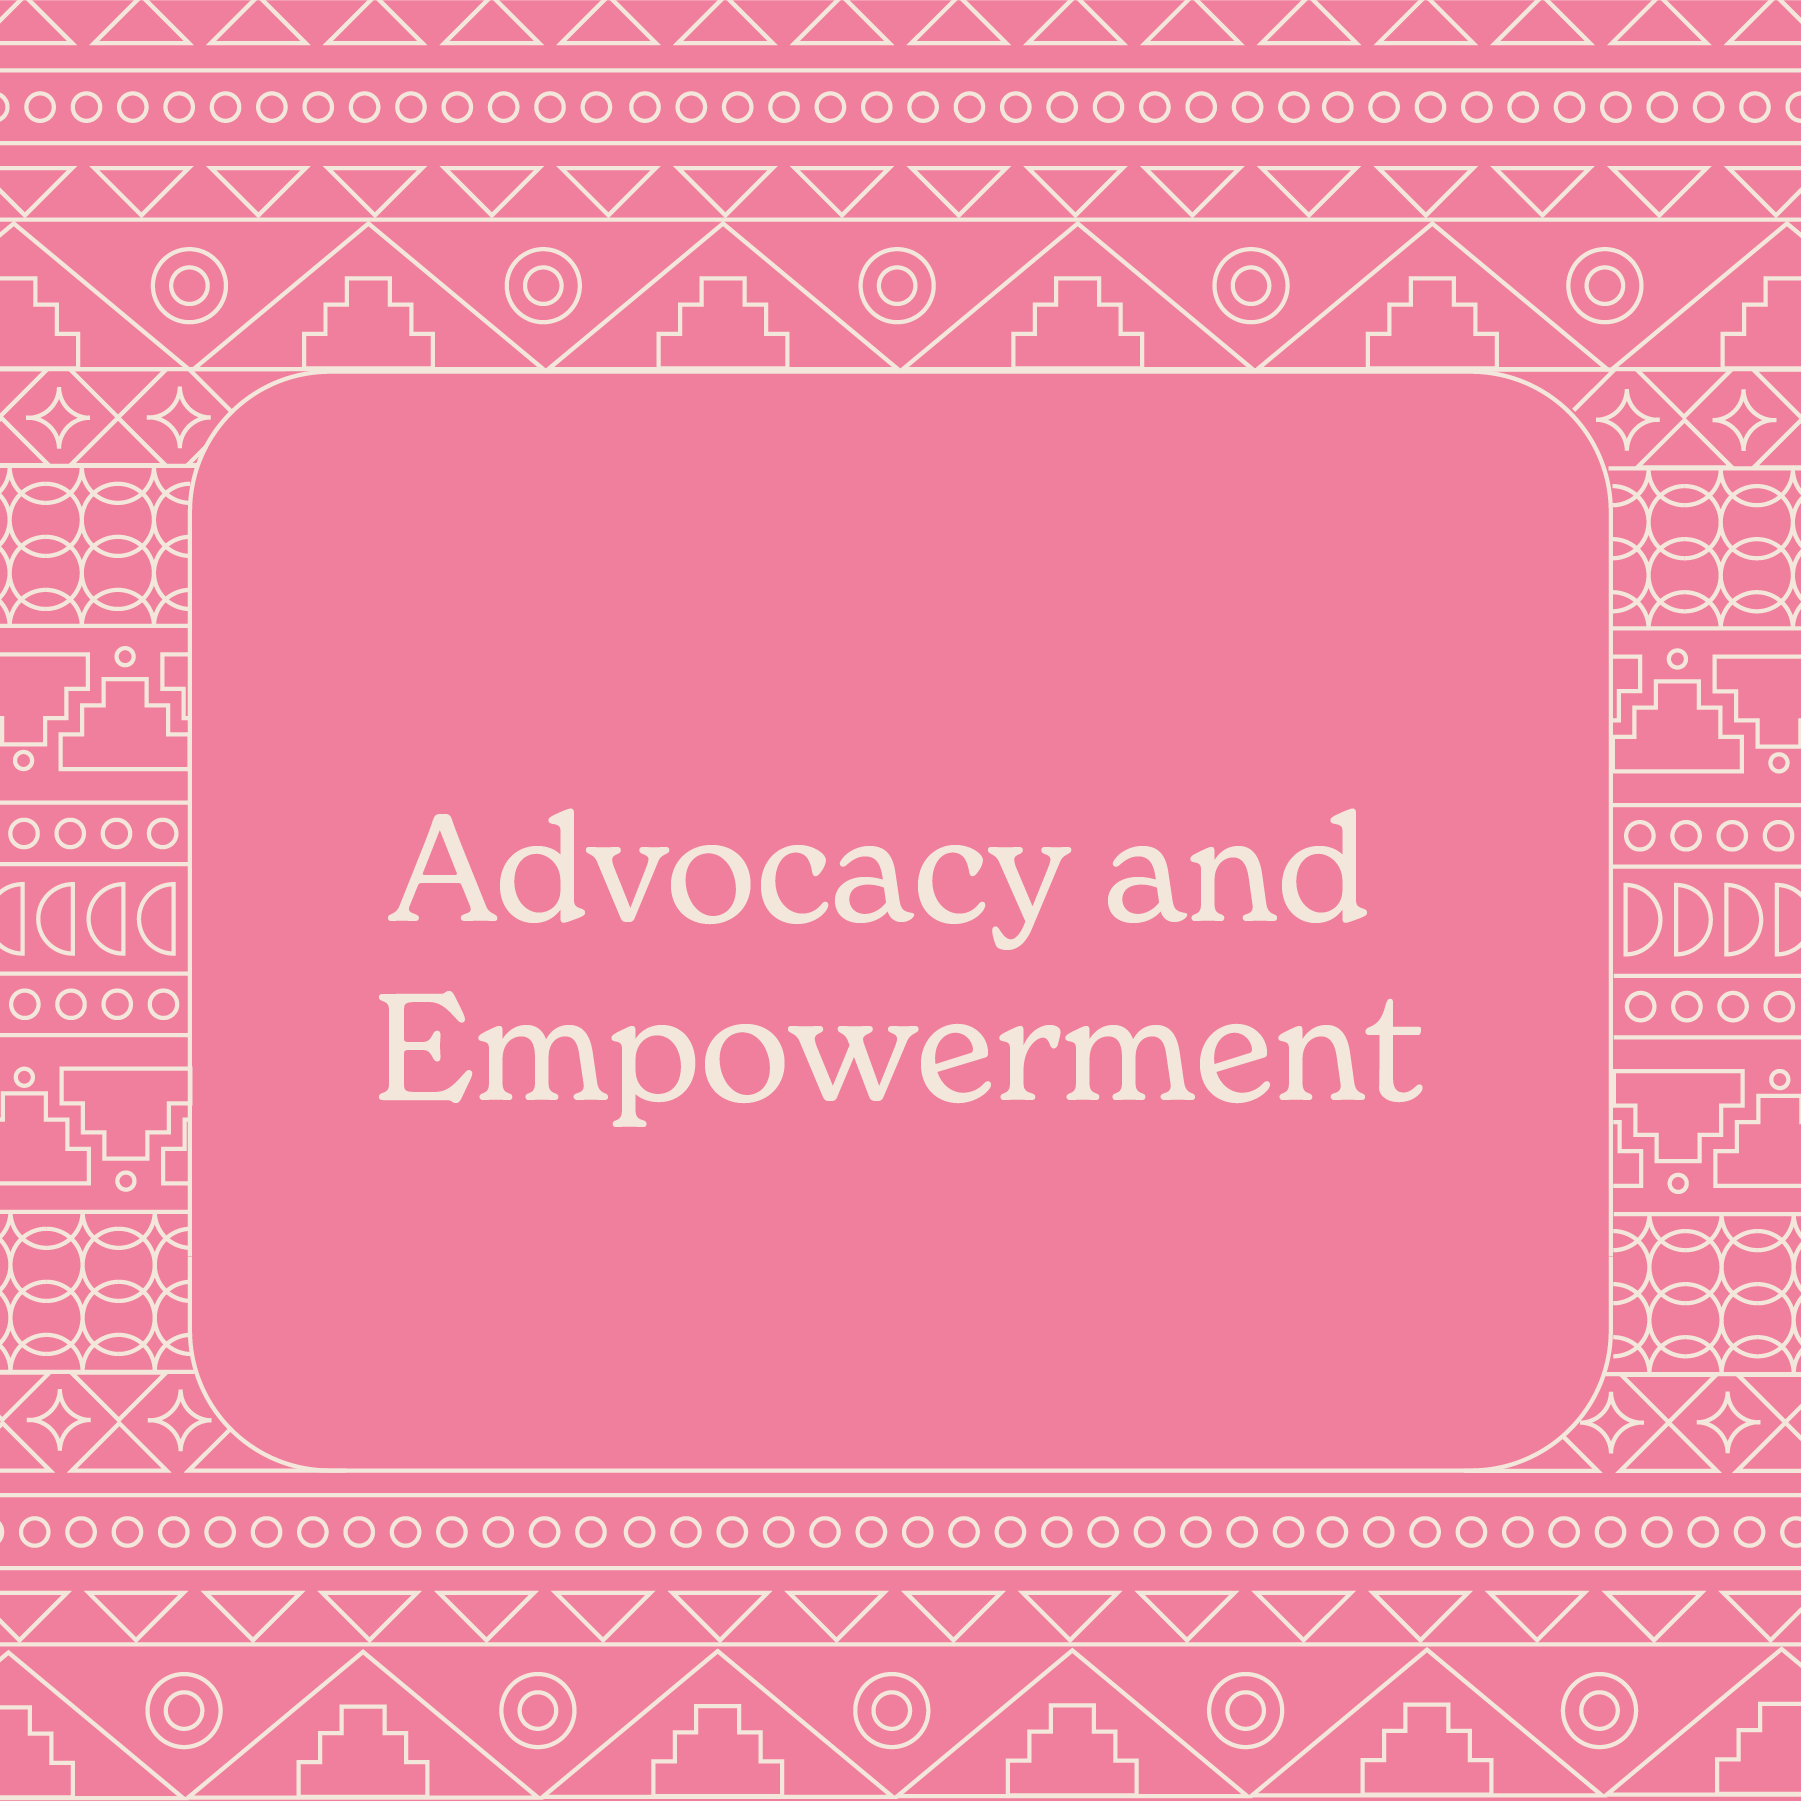 Advocacy and Empowerment